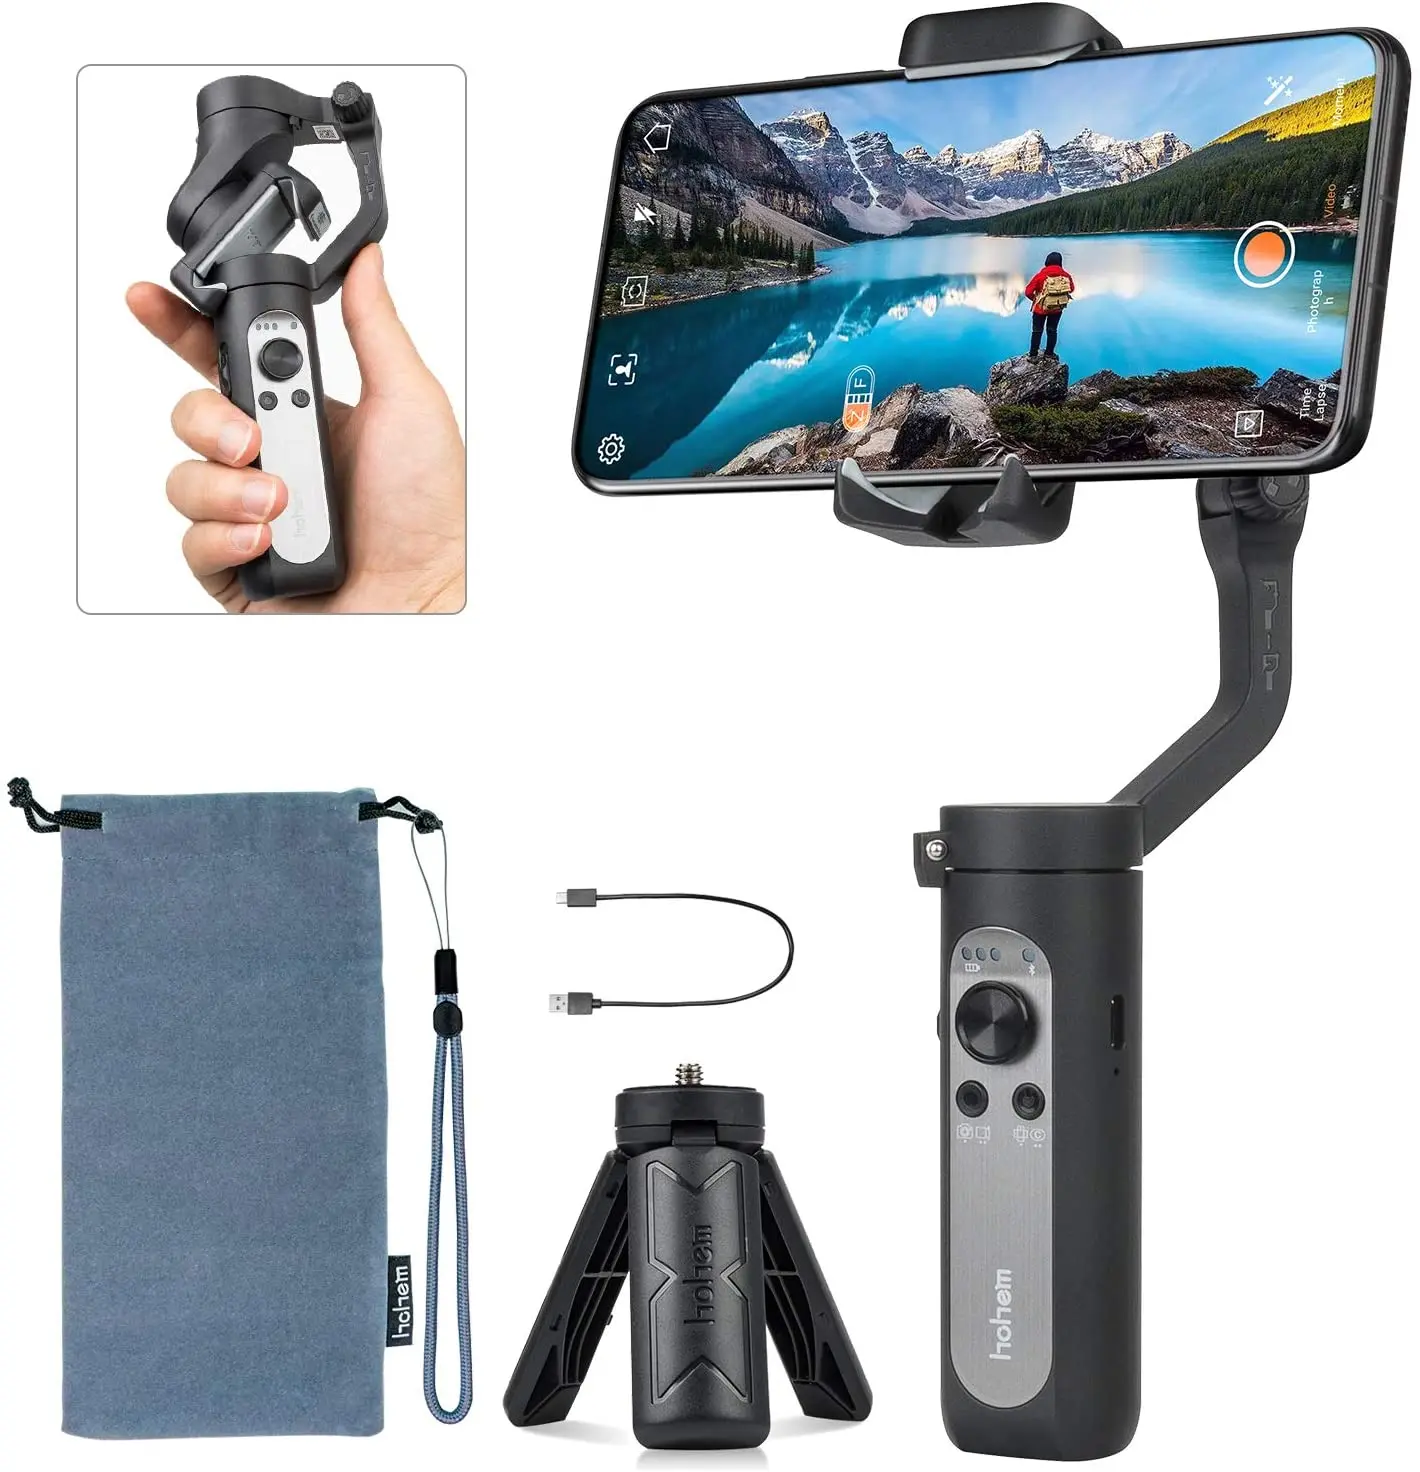 Hohem ISteady X Smartphone 3-Axis Foldable Gimbal Stabilizer For Smartphone P1P7 